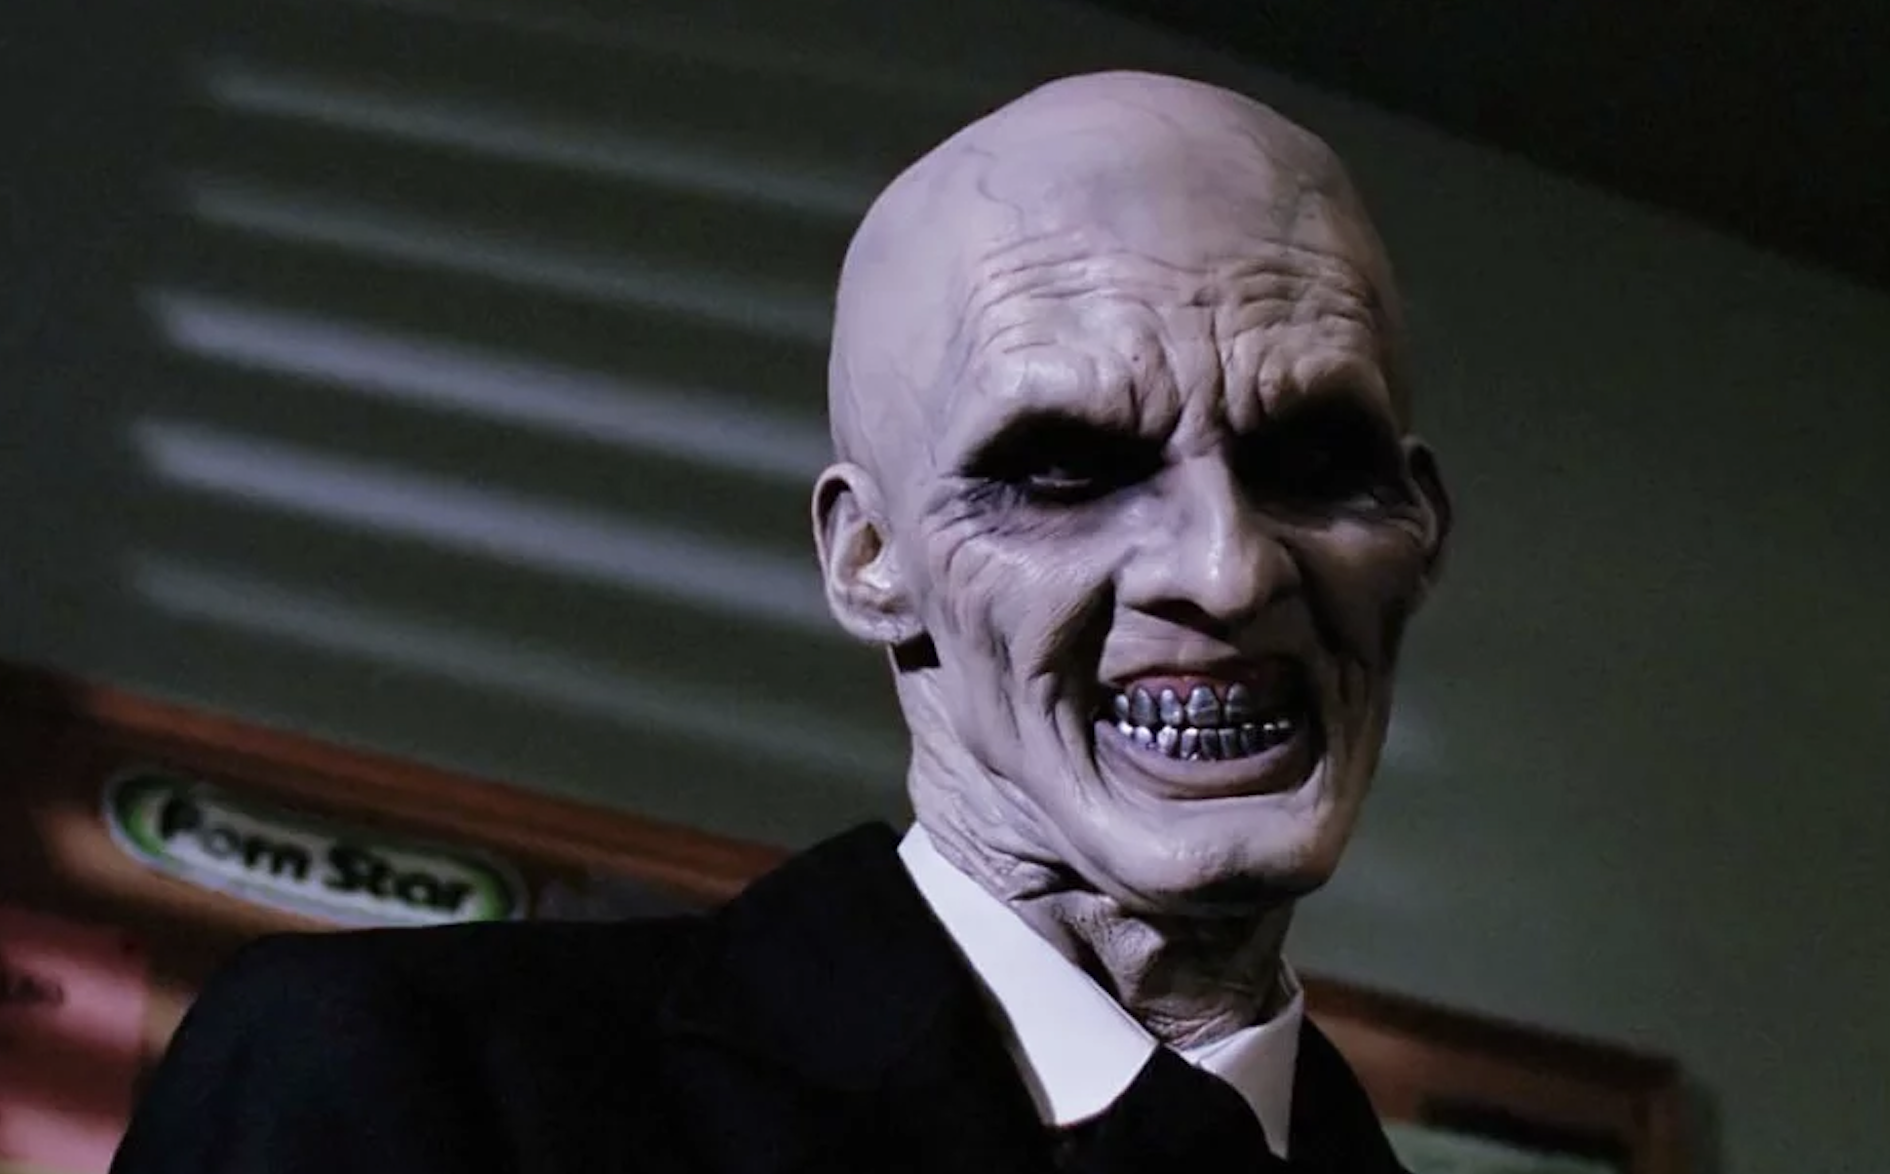 The character The Gentlemen from the TV show Buffy the Vampire Slayer, featuring a bald, sinister appearance with a wide, toothy smile